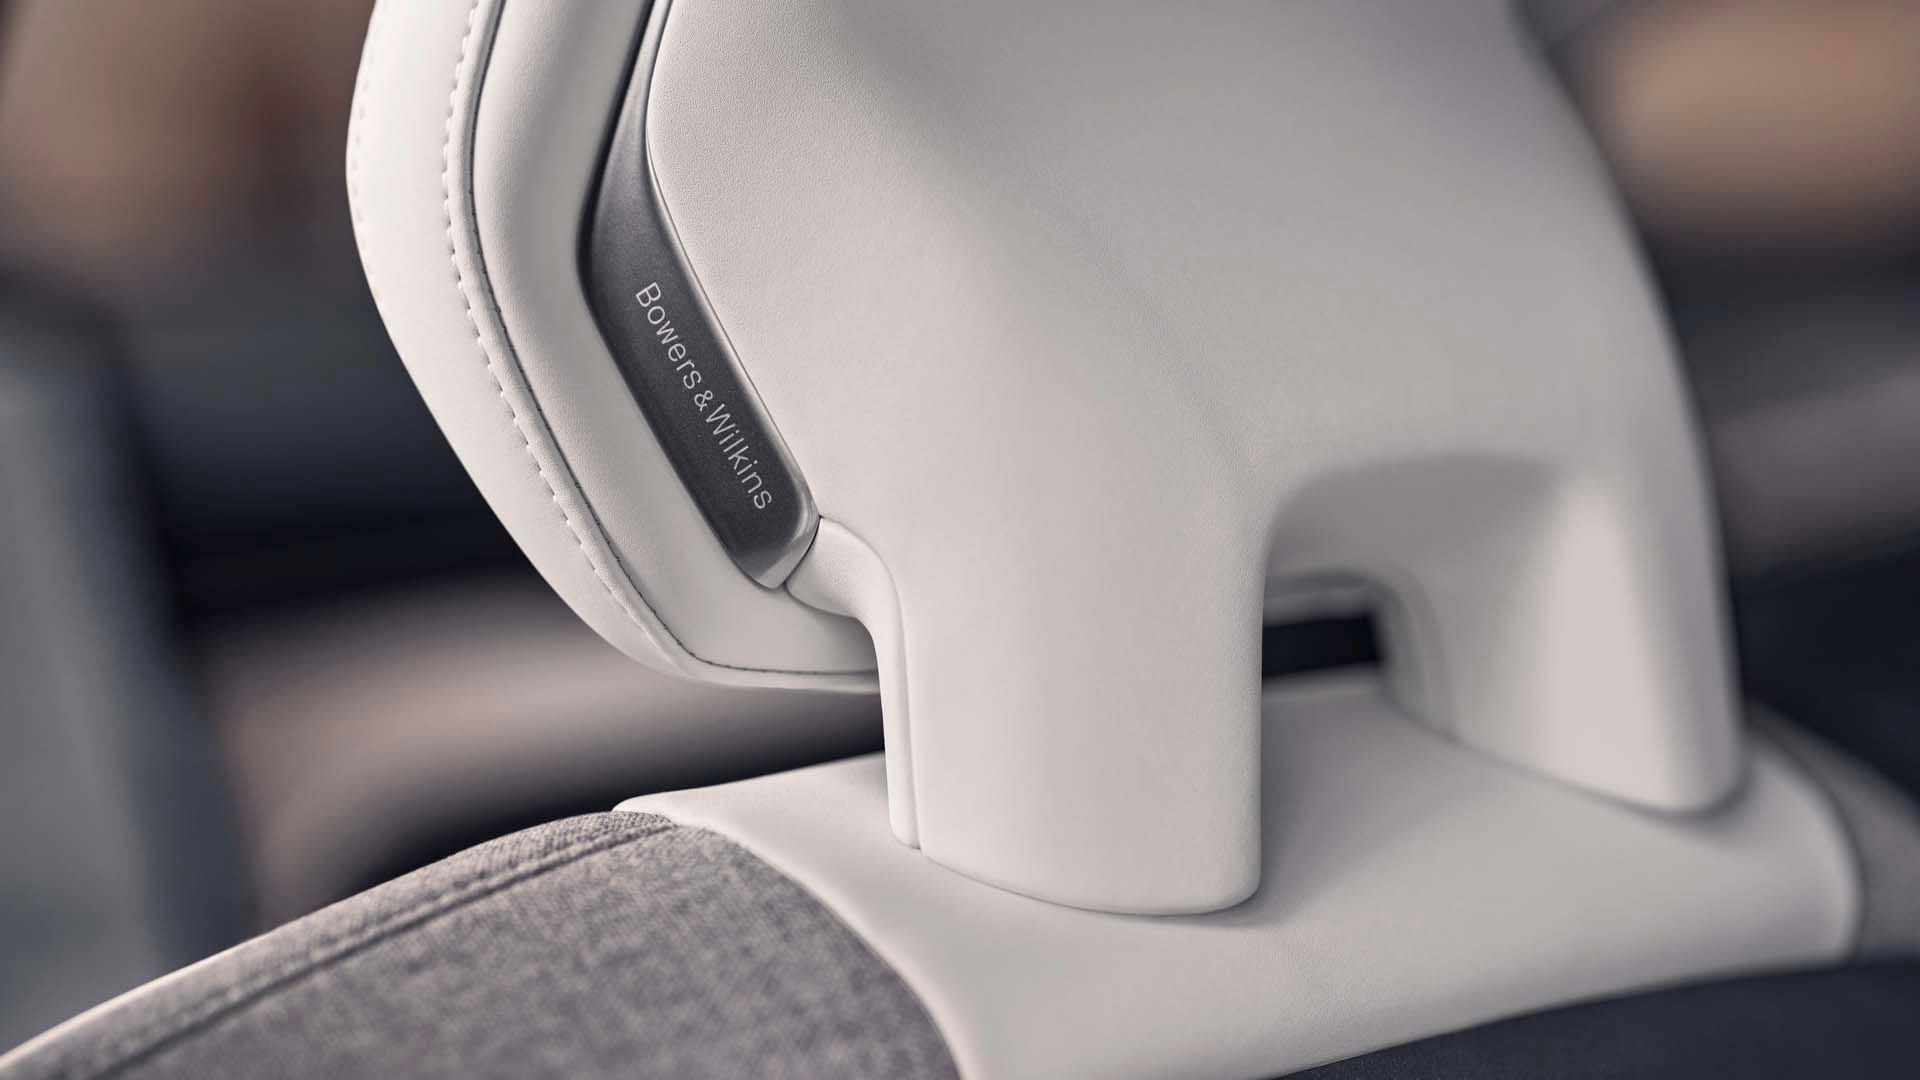 Sustainable materials in the Volvo EX90's cabin